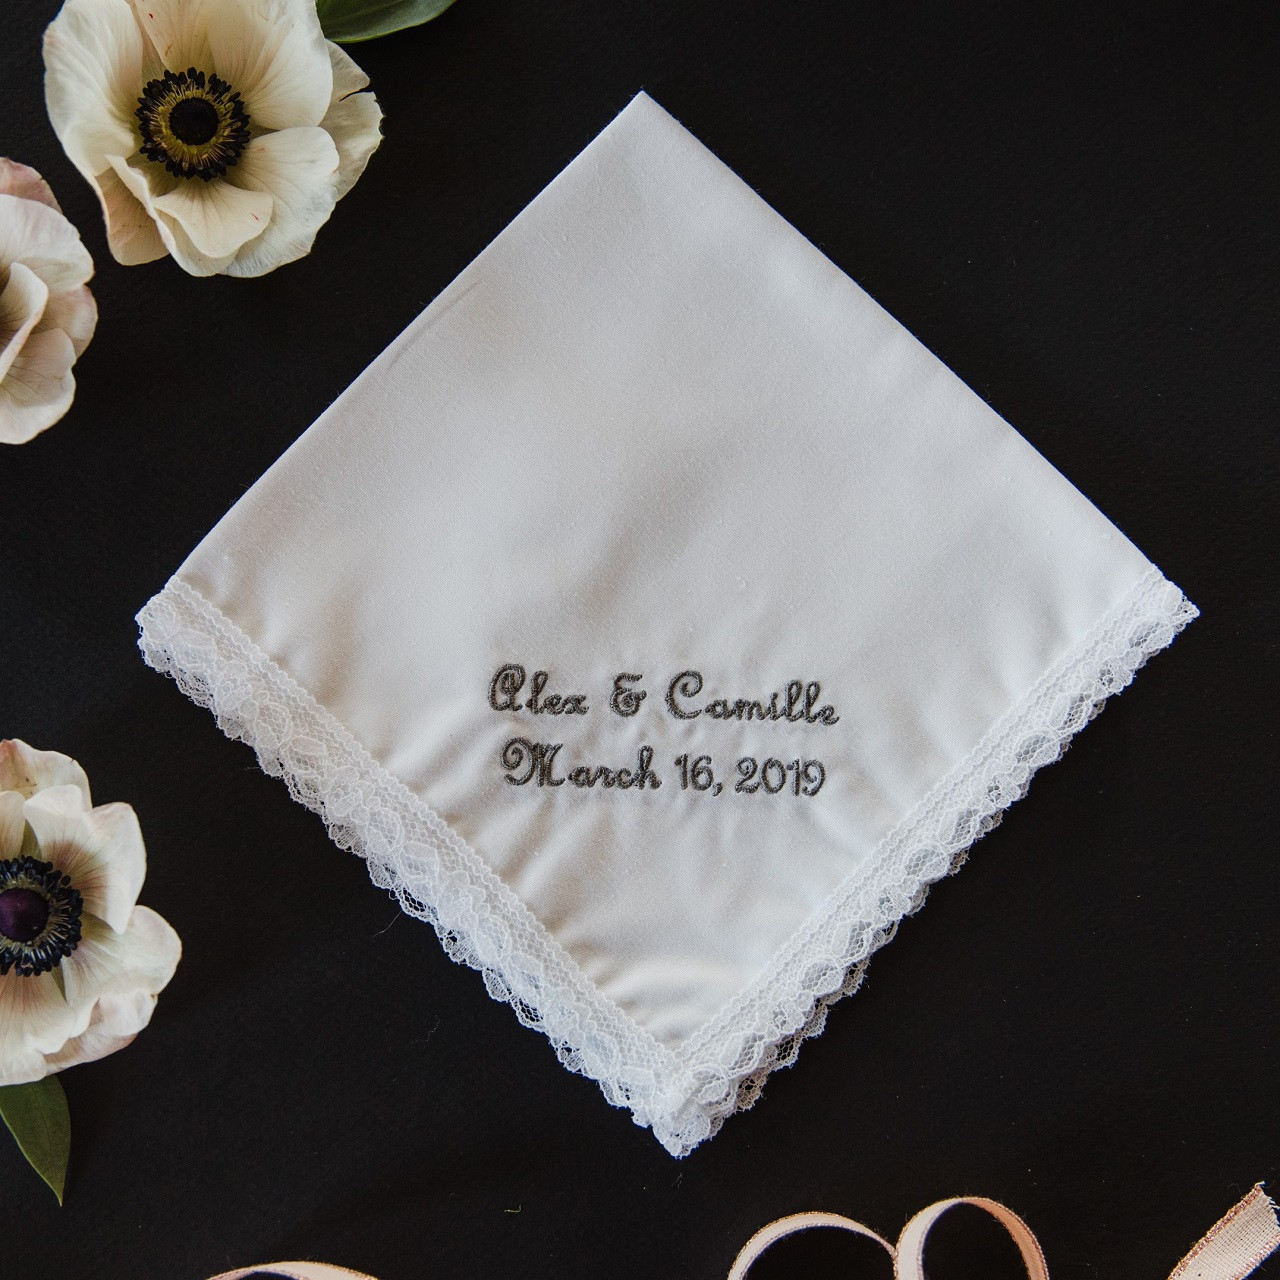 embroidered handkerchief with name